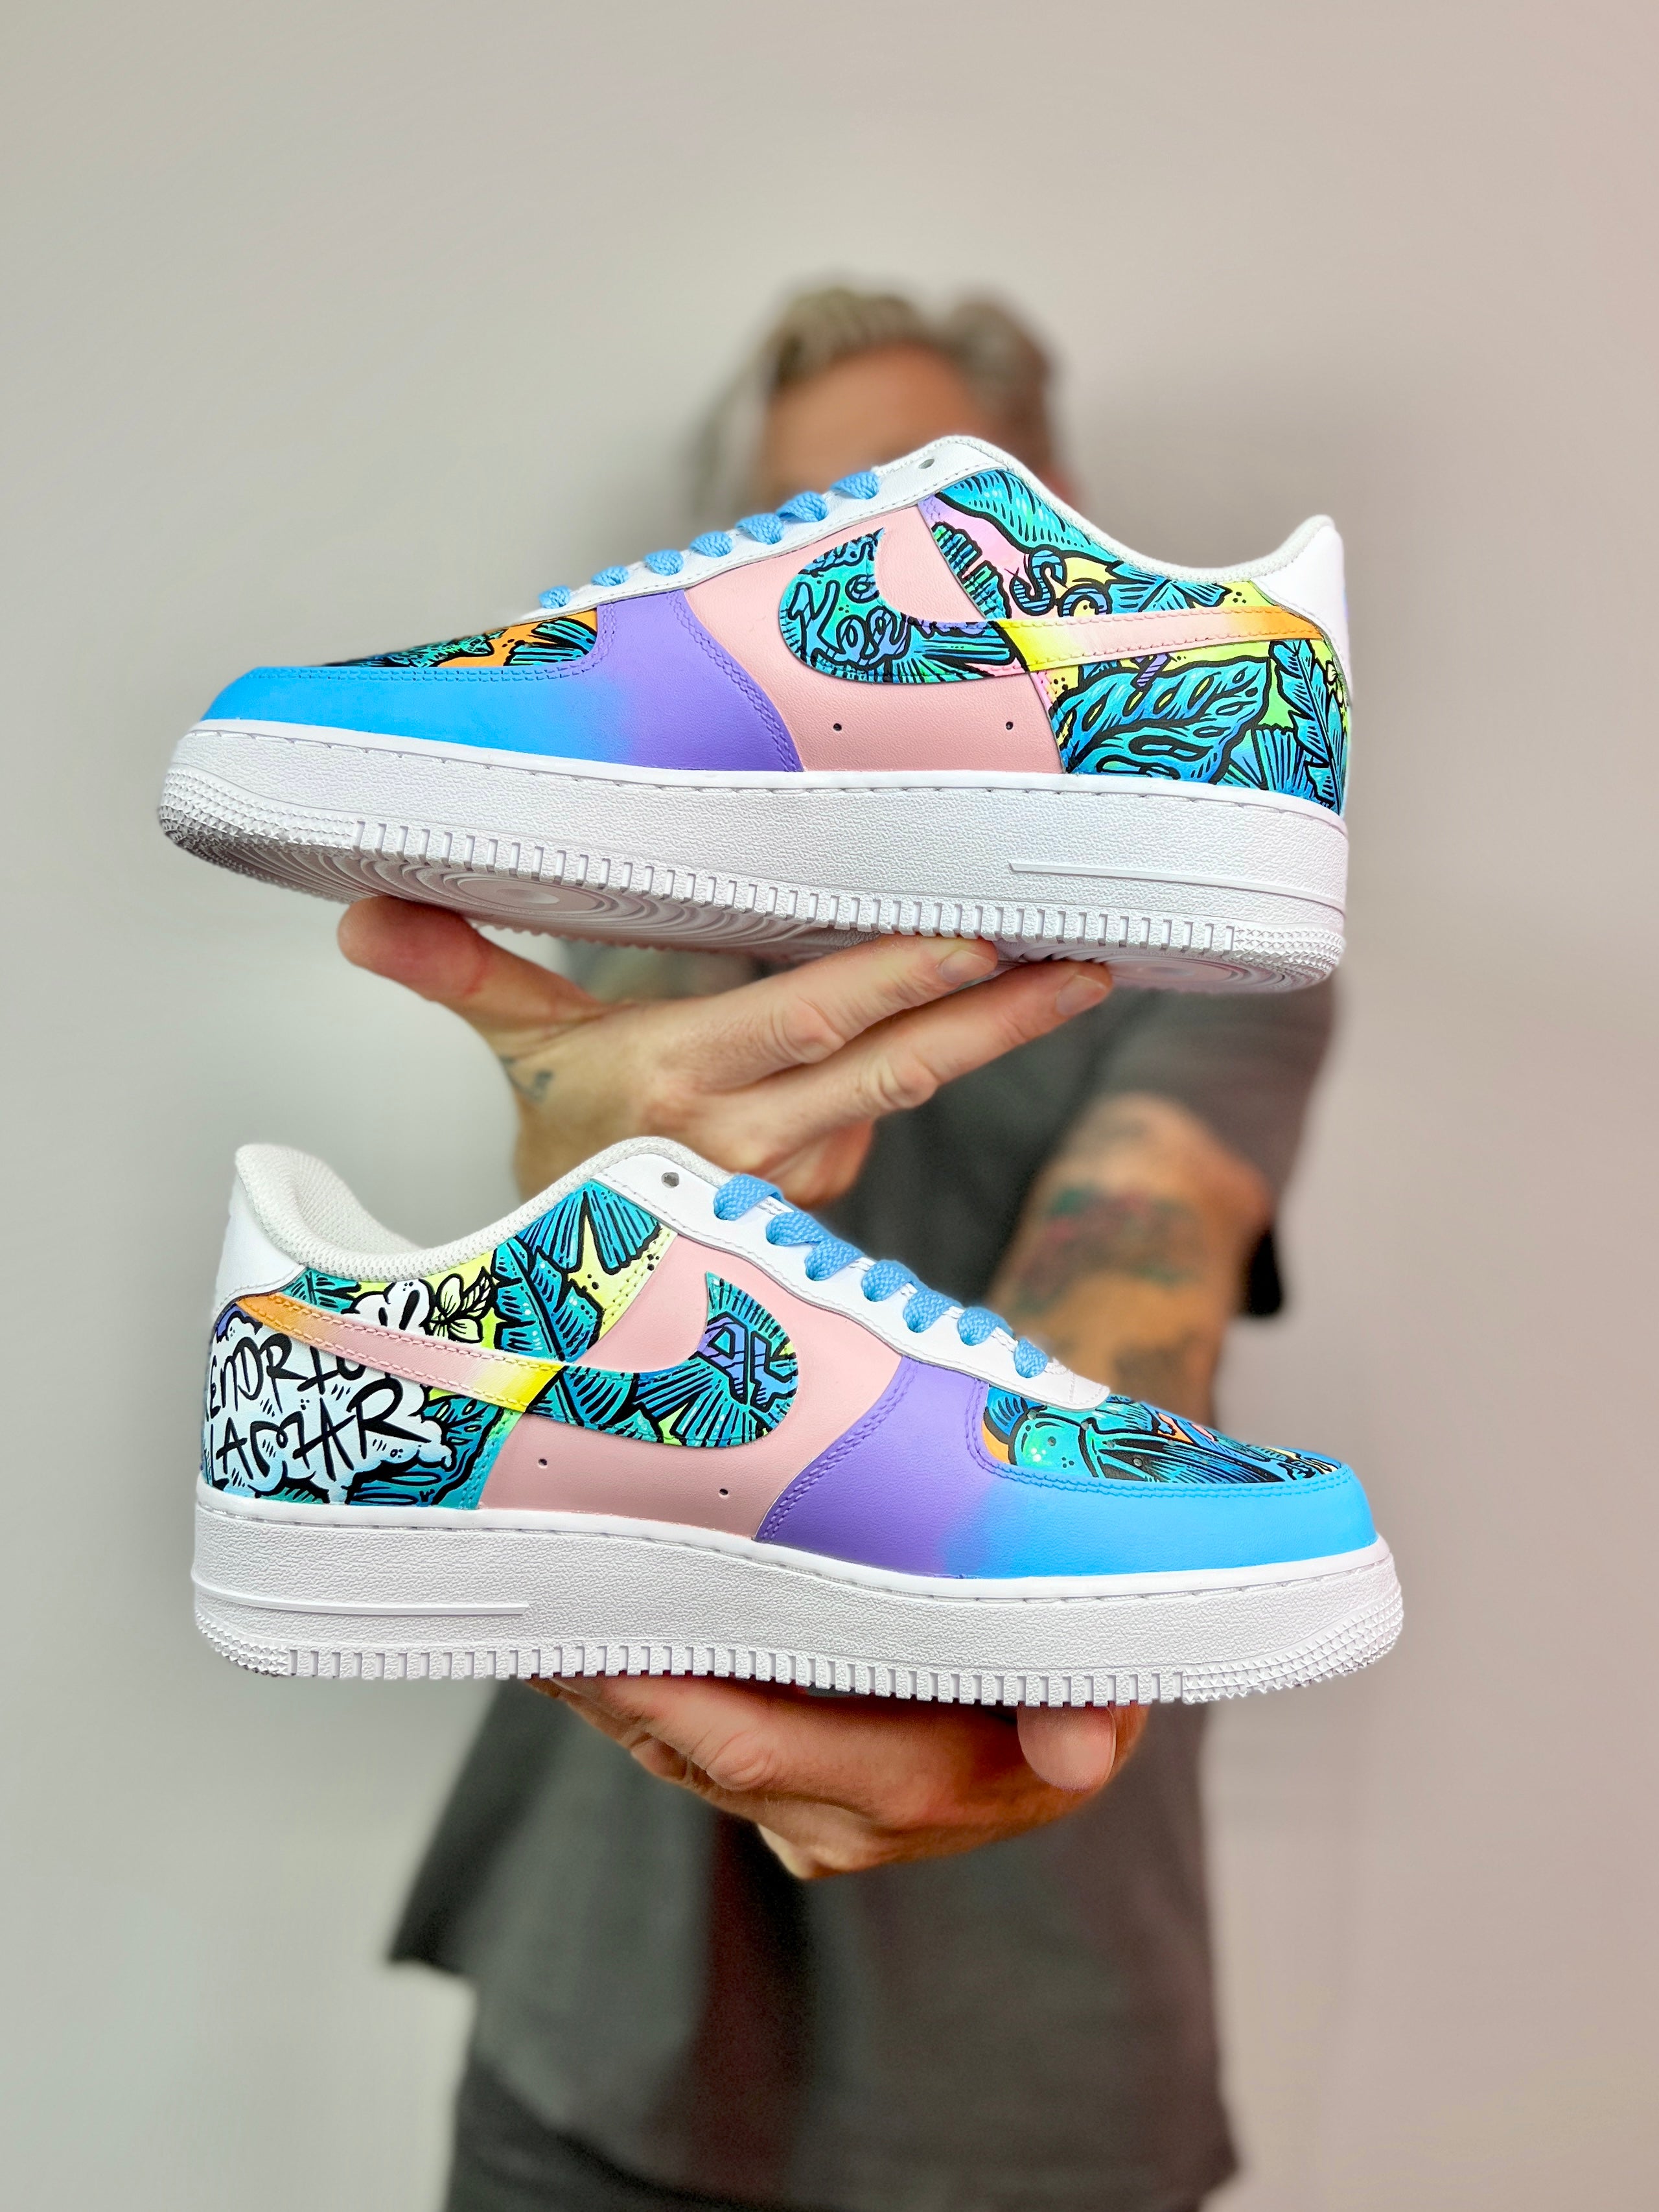 Bacardi X Osheaga X Chad Cantcolor - Festival collab Nike AF1 Sneakers